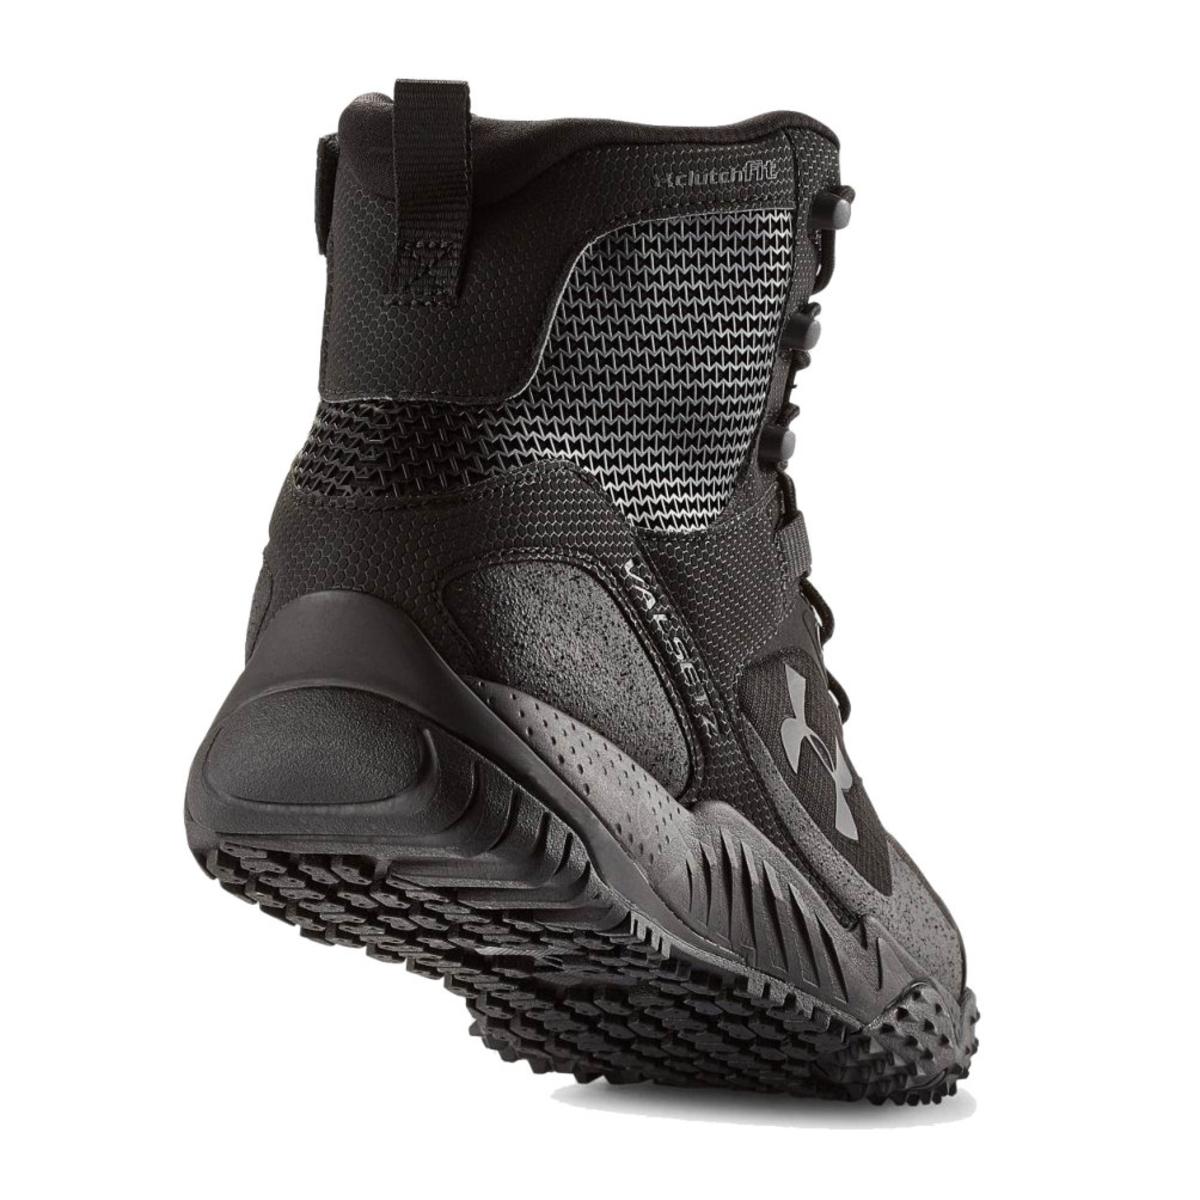 under armor police boots